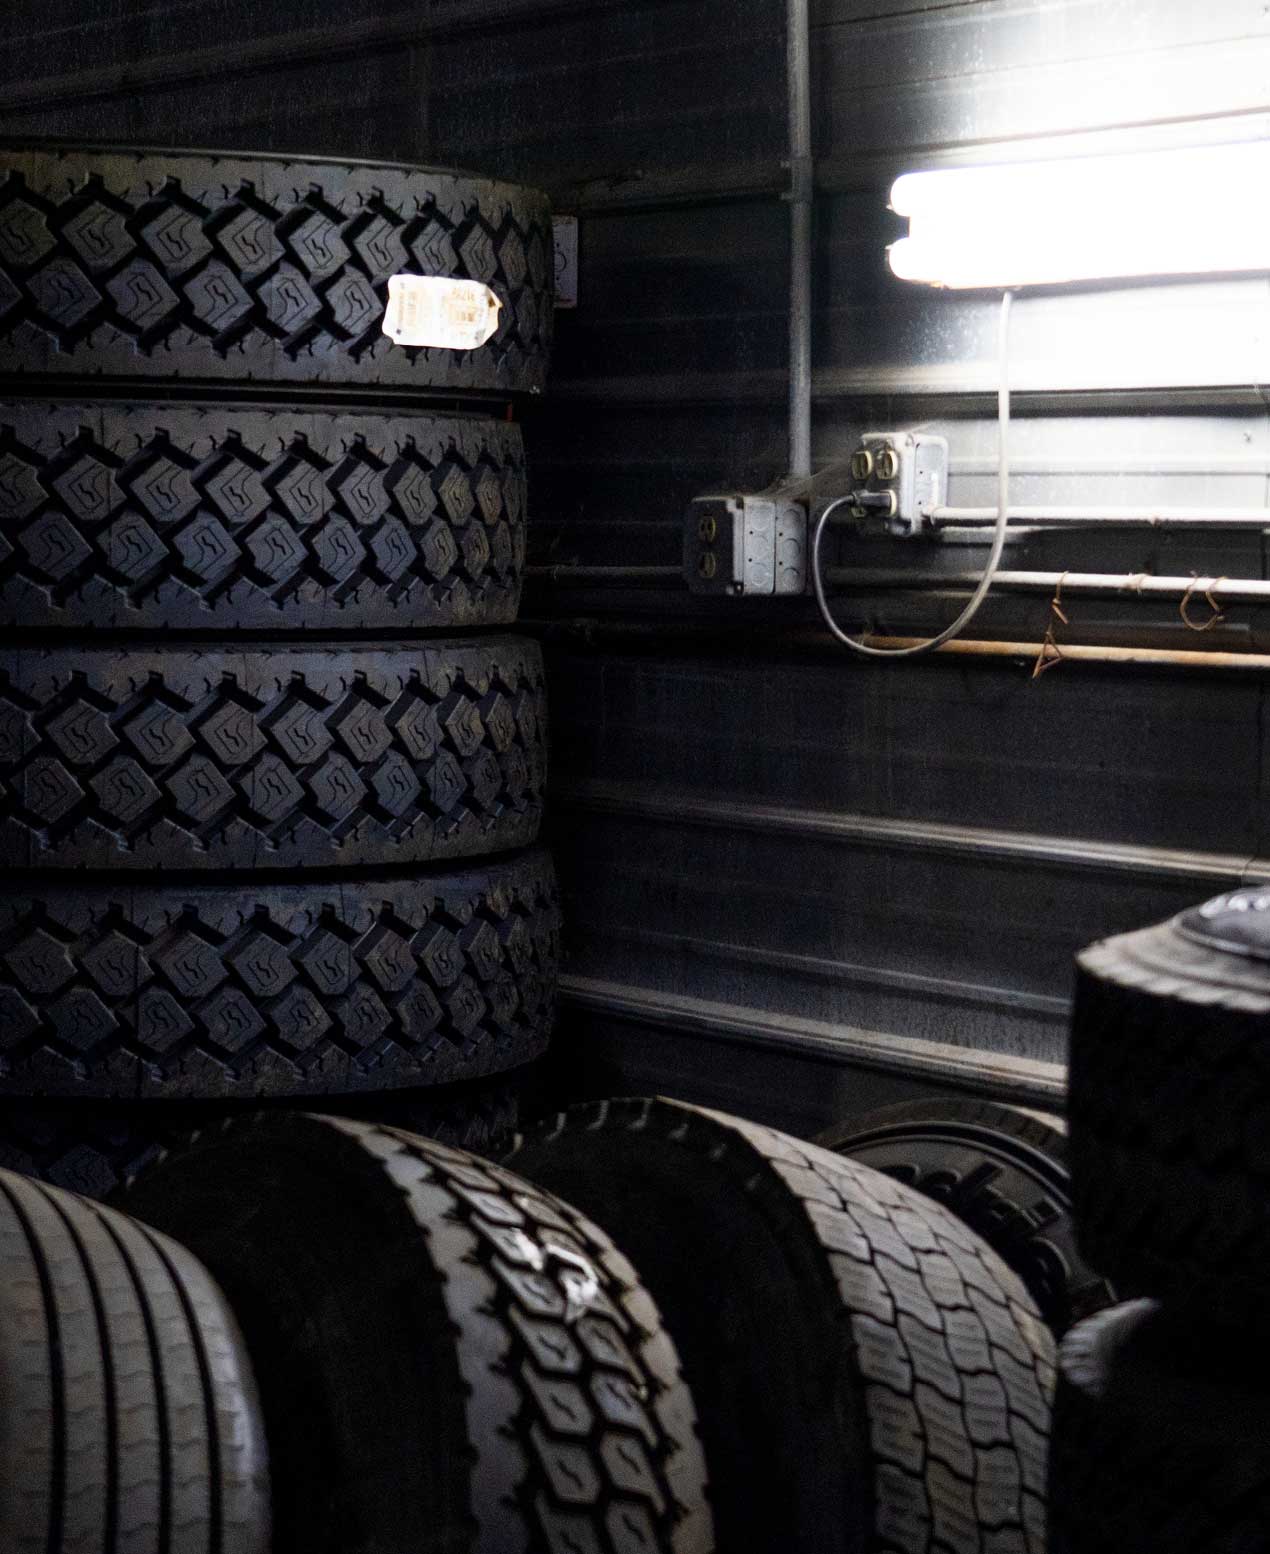 Tires with dramatic lighting.